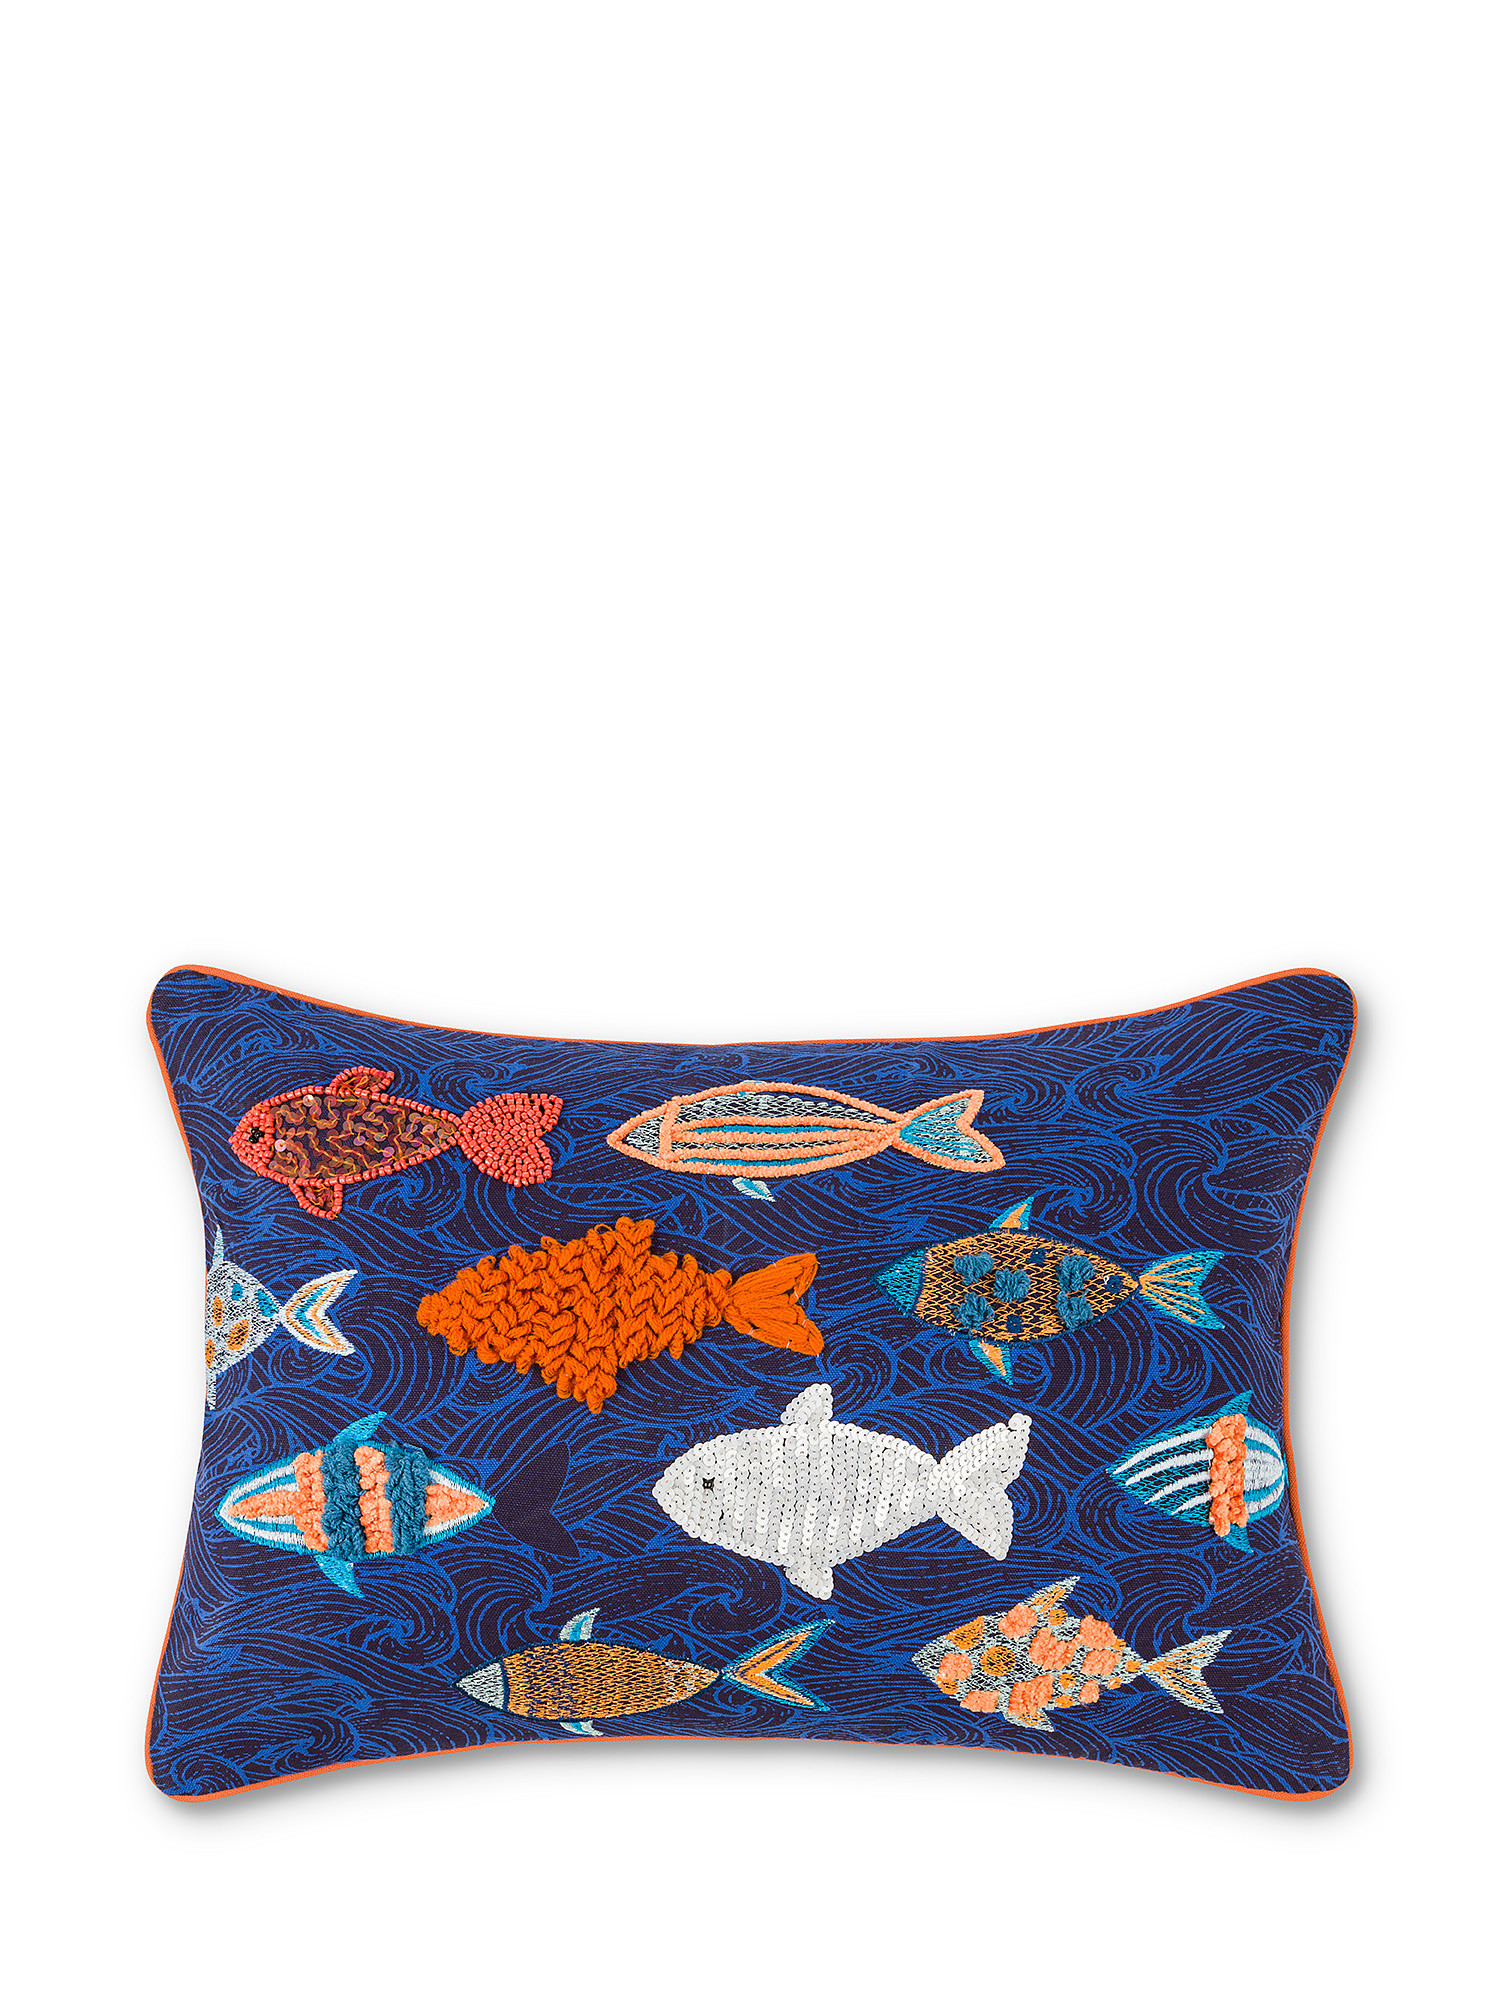 Cotton cushion with fish embroidery 35x50cm, Blue, large image number 0